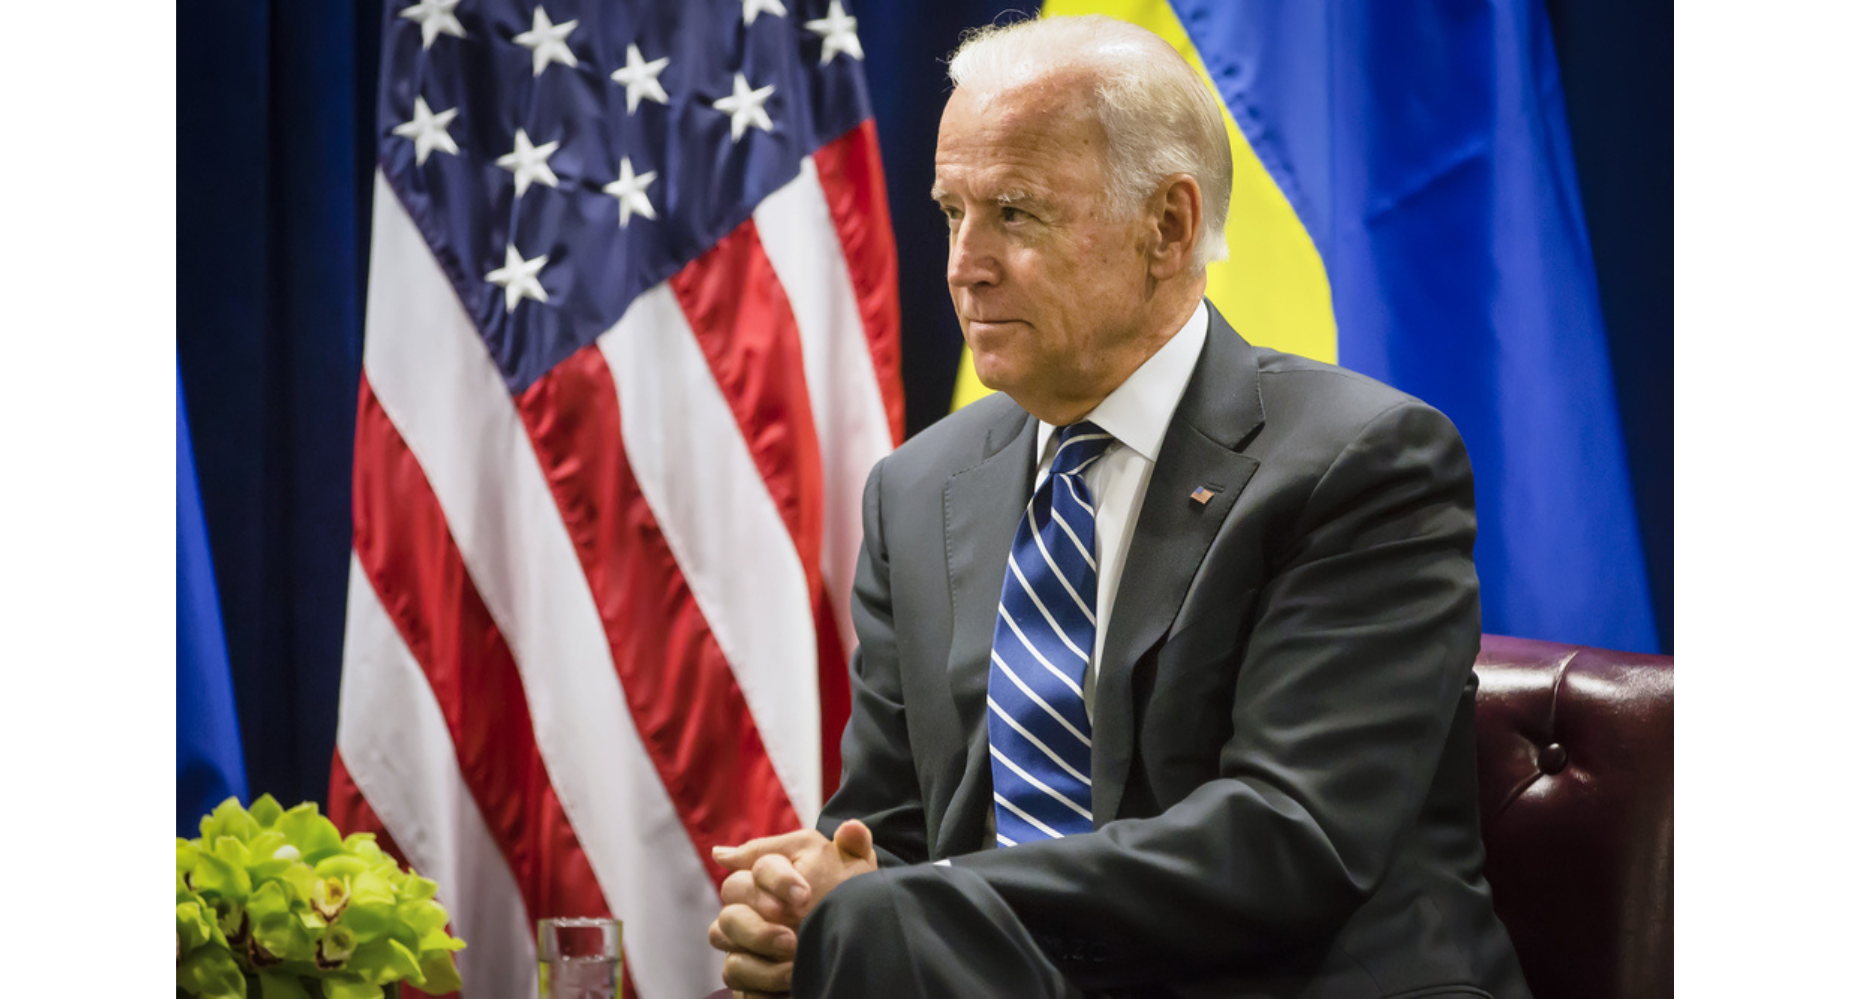 Democrats Wants New President Candidate In 2024: Here's Why They're Souring On Joe Biden (And It's Not Inflation)